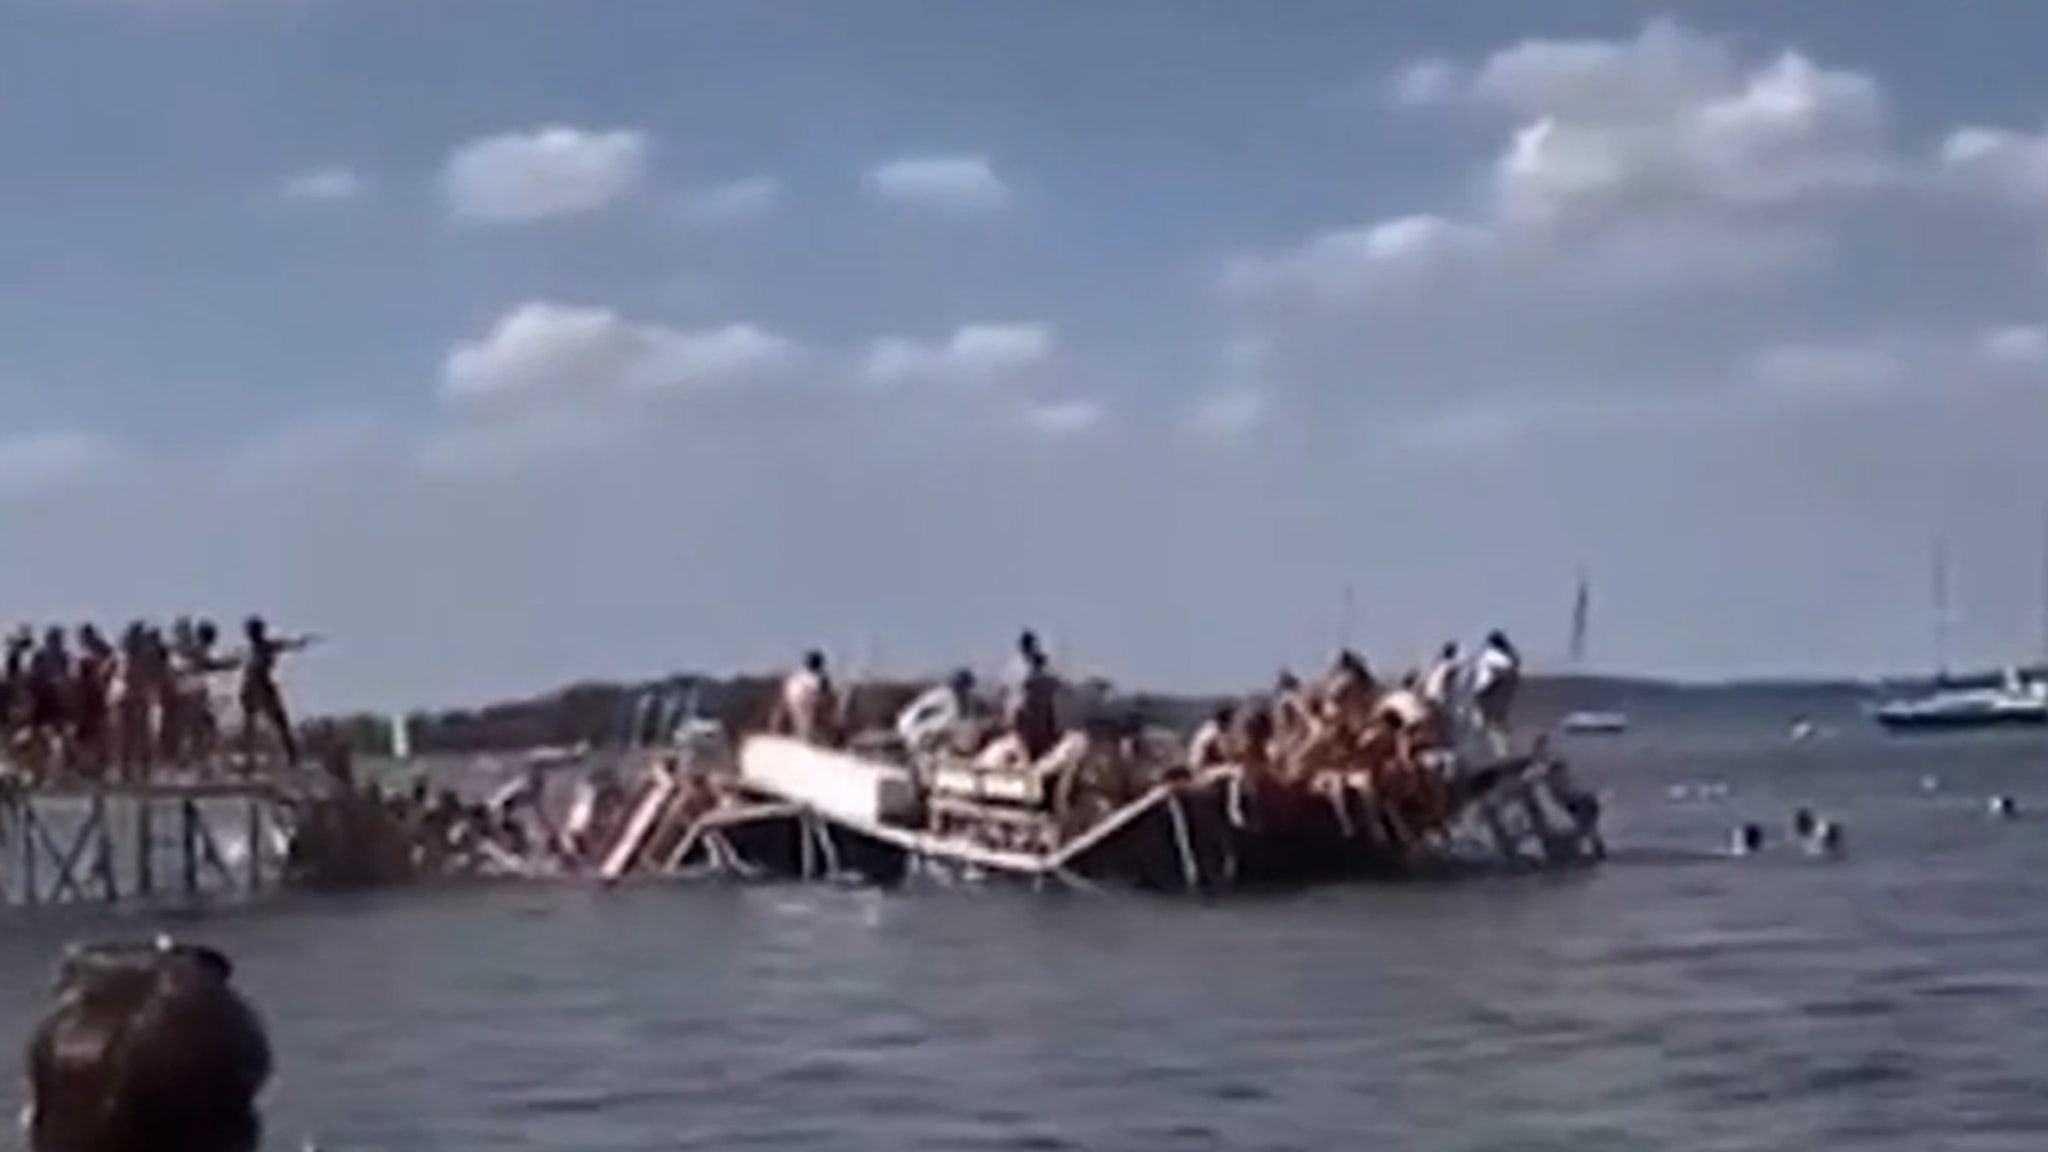 Pier Collapses and Dozens of U. of Wisconsin Students Fall Into Lake